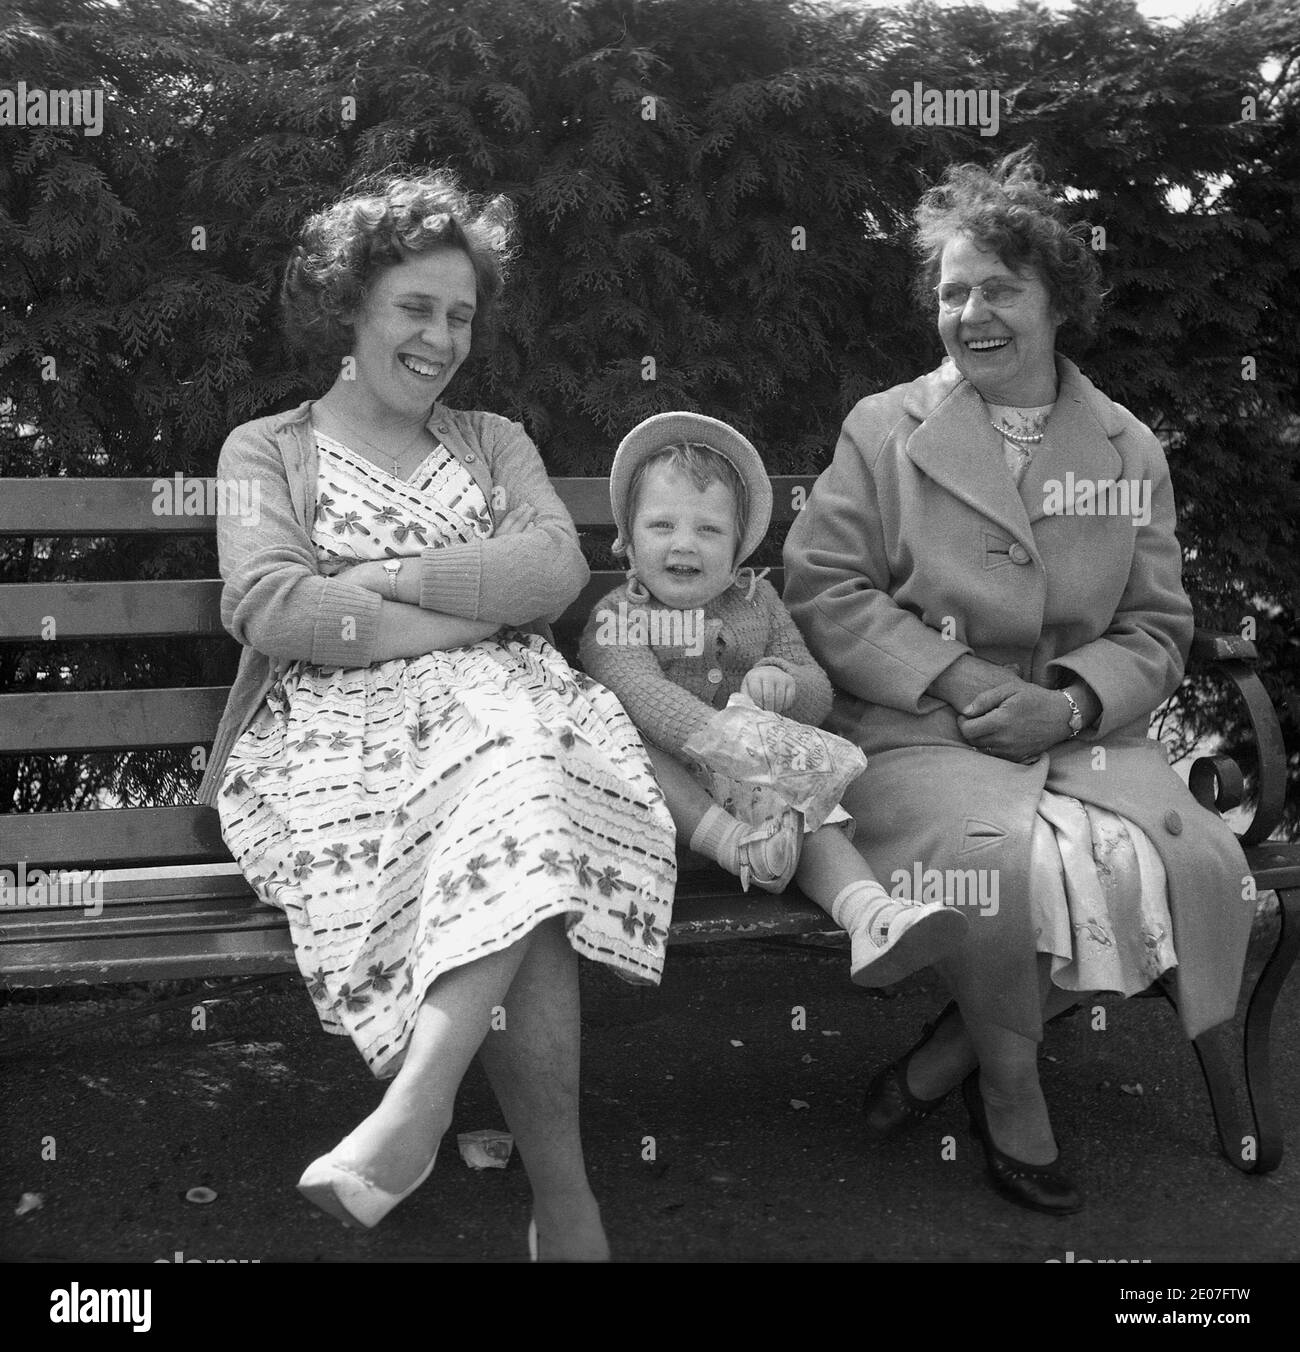 1950s, historical, happy family times, a mother sitting on a bench laughing together with her daughter, who is wearing a bonnet and whose hand is in a crisp packet, alongside the child's grandmother, who had a big smile on her face, England, UK. Stock Photo